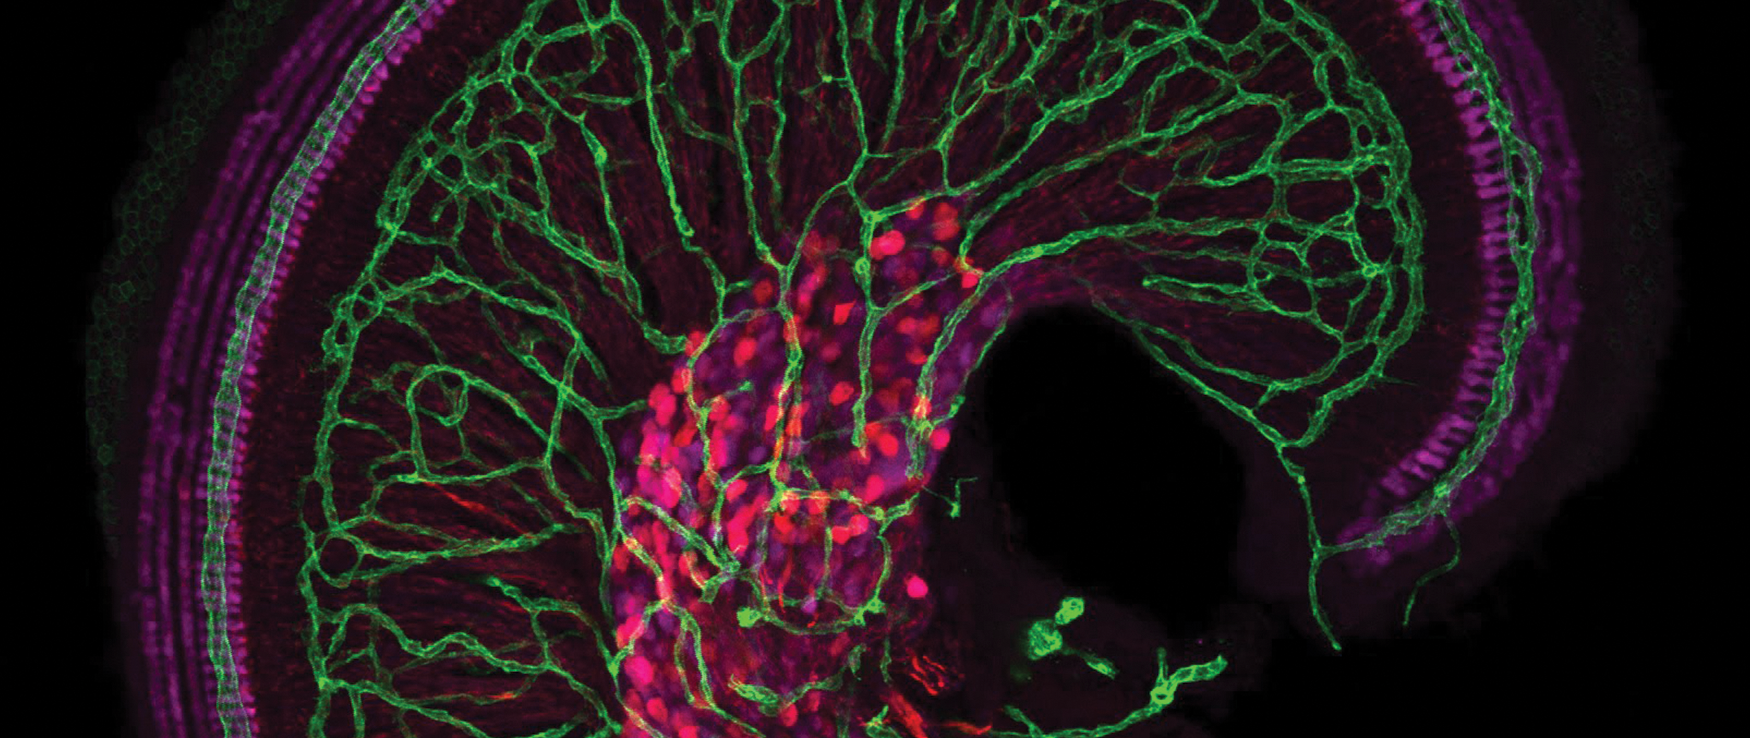 The apex of the snail-shaped cochlea, our hearing organ, with its dense vascular network (green) is shown here. The hair cells (magenta), which detect sound, are innervated by the primary auditory neurons, whose cell bodies and axons are also in magenta.